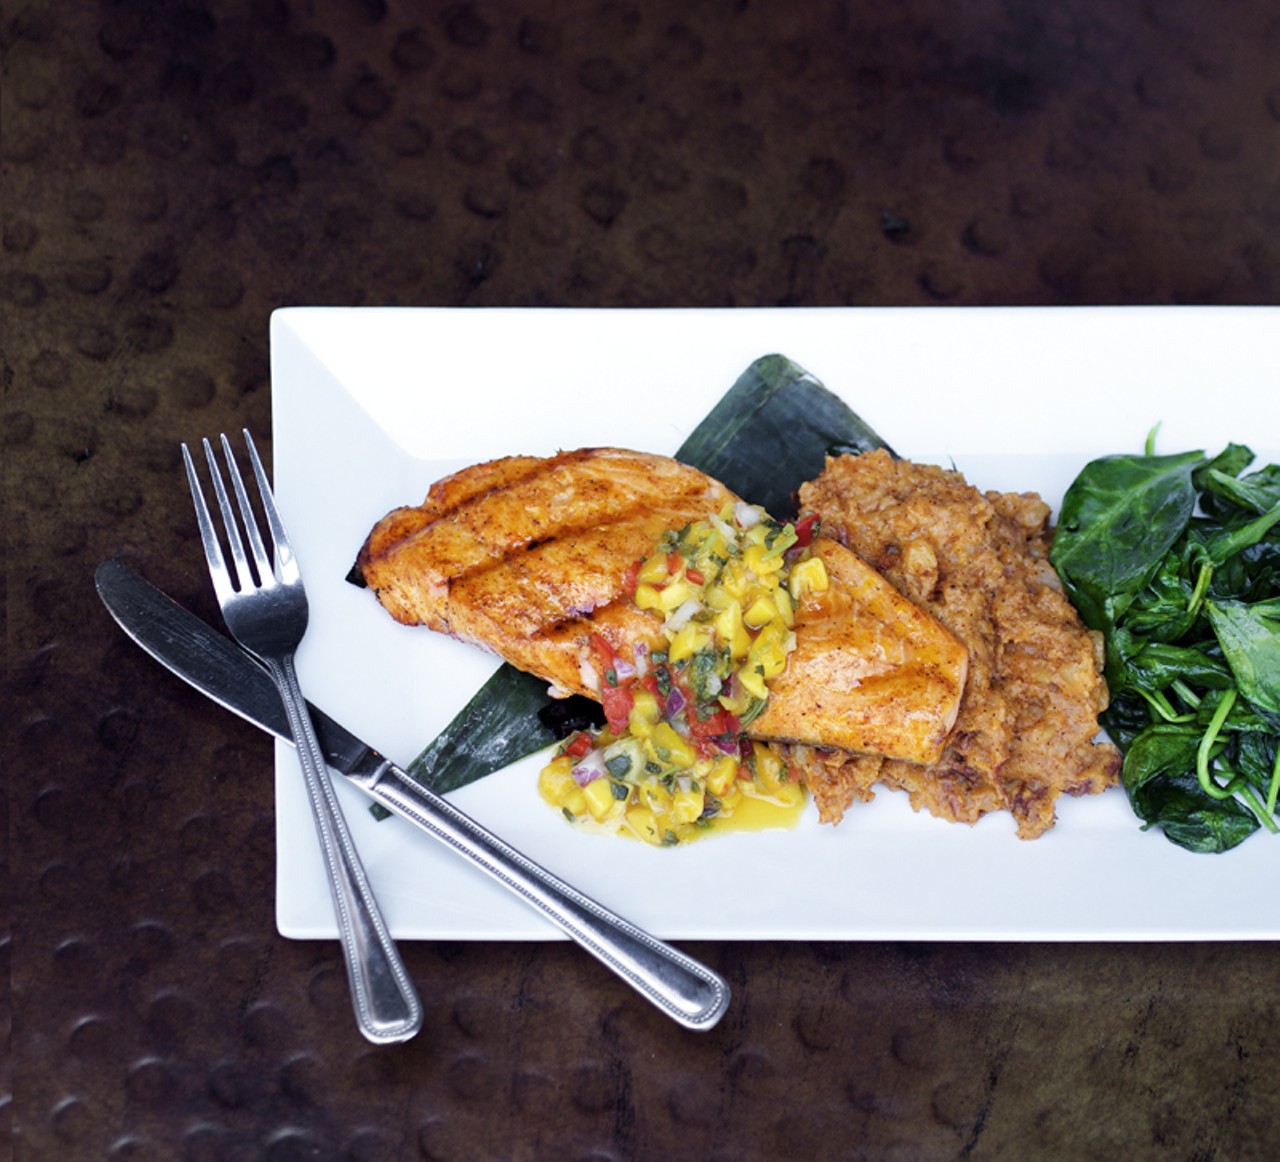 The SALM&Oacute;N YUCATECO is Atlantic salmon marinated in achiote and grilled in a banana leaf. Topped with mango salsa and annatto oil, it's served with chile mashed potatoes and garlic spinach.